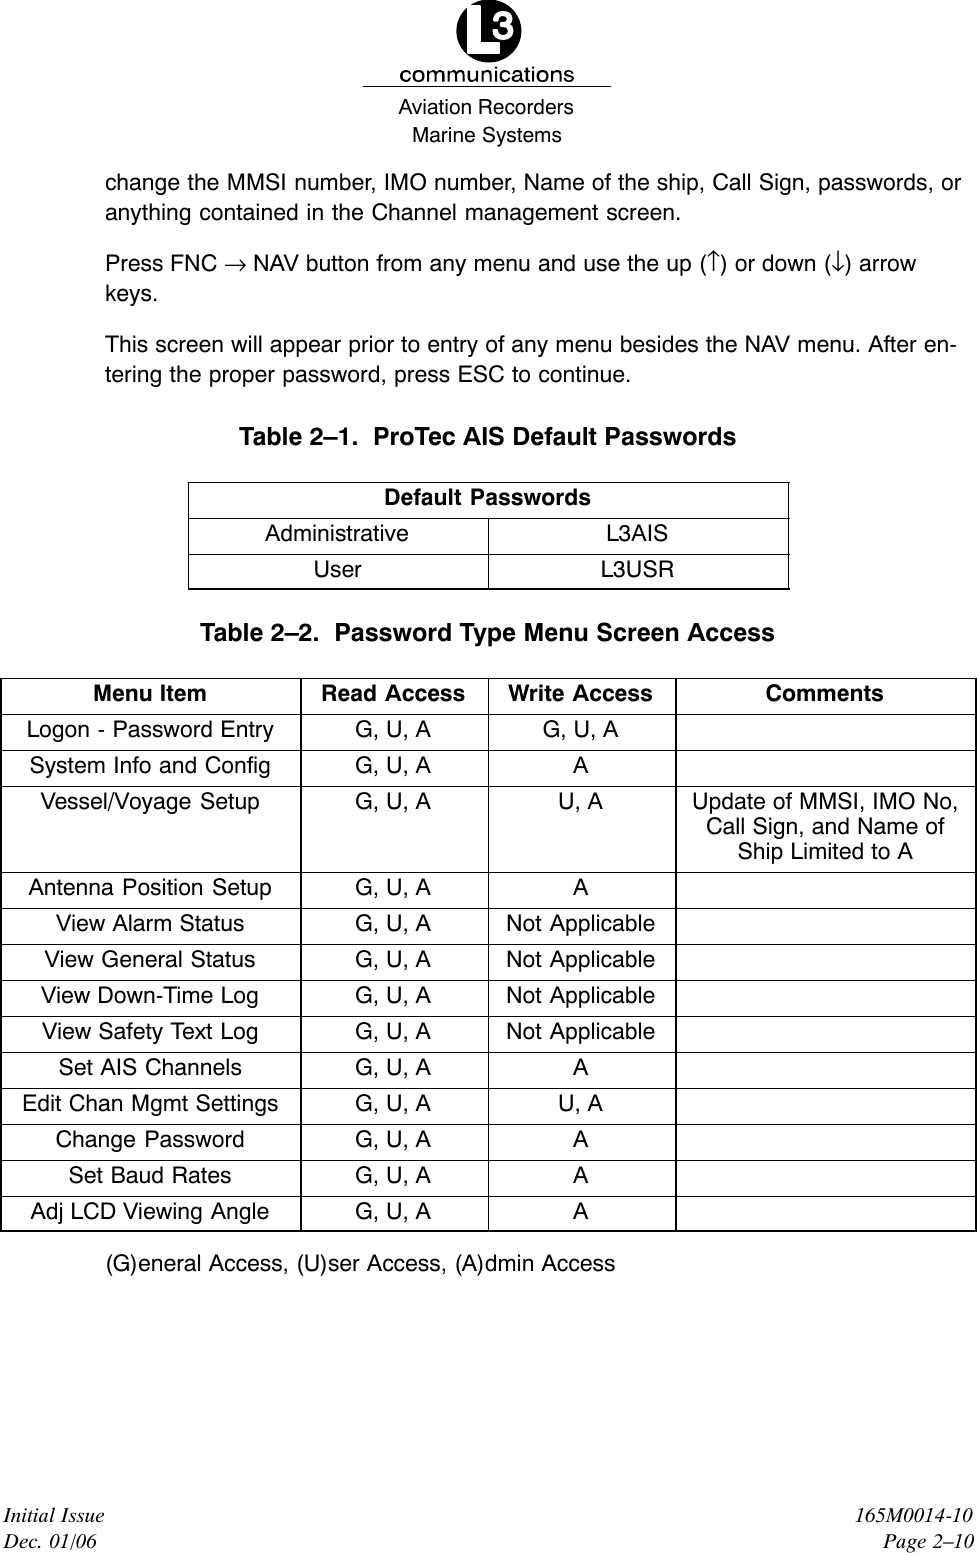 Marine SystemsAviation RecordersInitial IssueDec. 01/06165M0014-10Page 2–10change the MMSI number, IMO number, Name of the ship, Call Sign, passwords, oranything contained in the Channel management screen.Press FNC → NAV button from any menu and use the up (↑) or down (↓) arrowkeys.This screen will appear prior to entry of any menu besides the NAV menu. After en-tering the proper password, press ESC to continue.Table 2–1.  ProTec AIS Default PasswordsDefault PasswordsAdministrative L3AISUser L3USRTable 2–2.  Password Type Menu Screen AccessMenu Item Read Access Write Access CommentsLogon - Password Entry G, U, A G, U, ASystem Info and Config G, U, A AVessel/Voyage Setup G, U, A U, A Update of MMSI, IMO No,Call Sign, and Name ofShip Limited to AAntenna Position Setup G, U, A AView Alarm Status G, U, A Not ApplicableView General Status G, U, A Not ApplicableView Down-Time Log G, U, A Not ApplicableView Safety Text Log G, U, A Not ApplicableSet AIS Channels G, U, A AEdit Chan Mgmt Settings G, U, A U, AChange Password G, U, A ASet Baud Rates G, U, A AAdj LCD Viewing Angle G, U, A A(G)eneral Access, (U)ser Access, (A)dmin Access